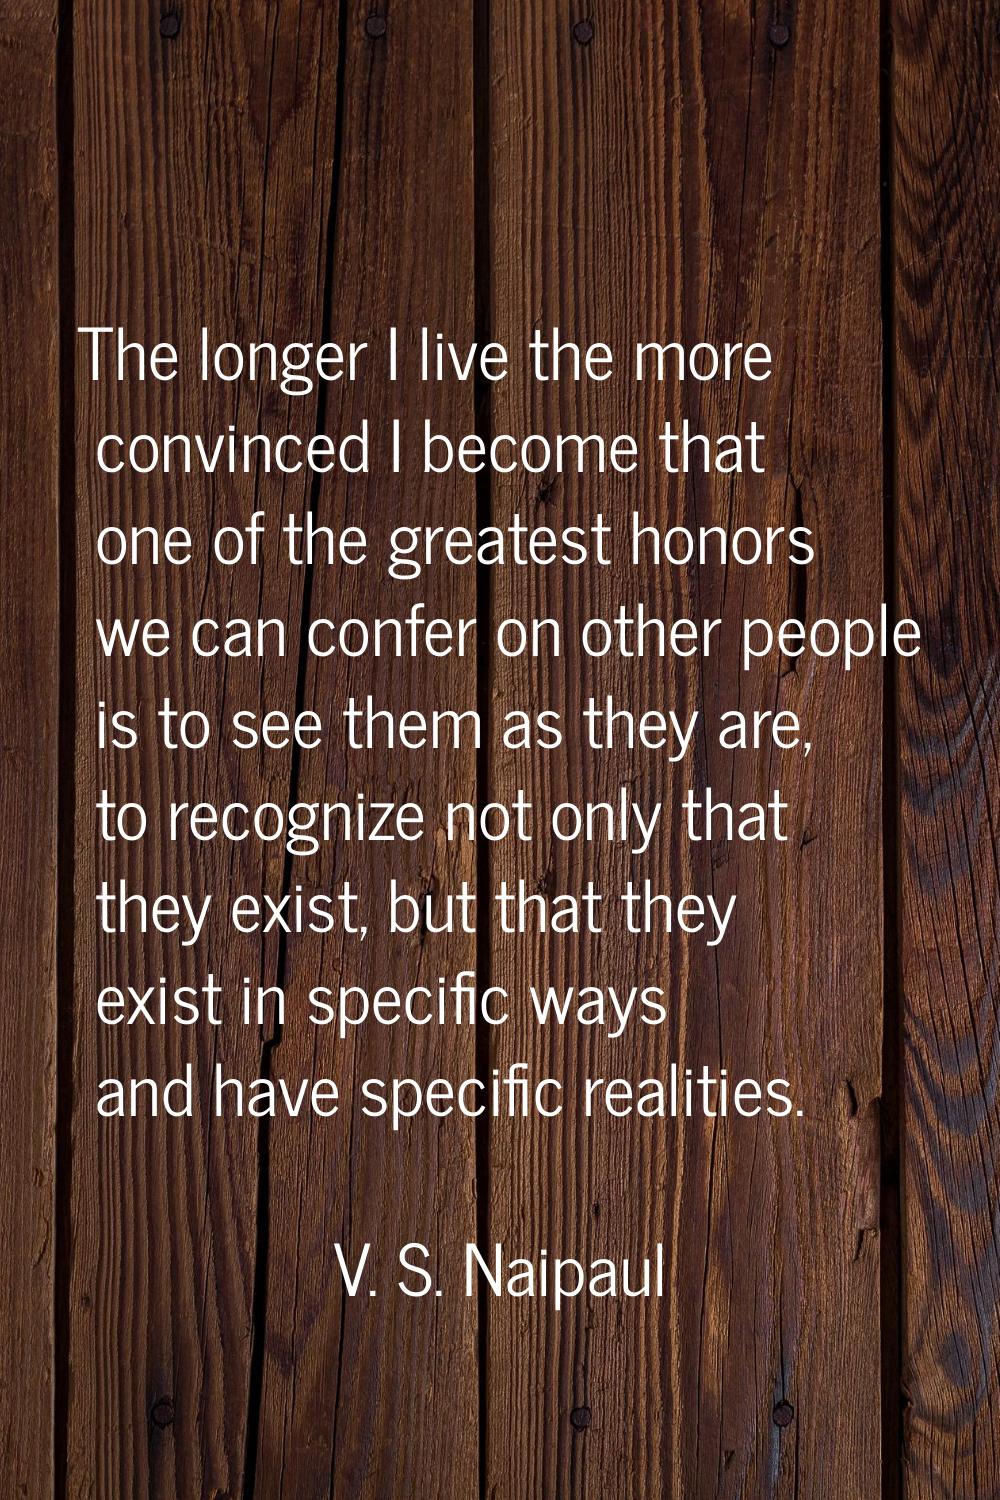 The longer I live the more convinced I become that one of the greatest honors we can confer on othe